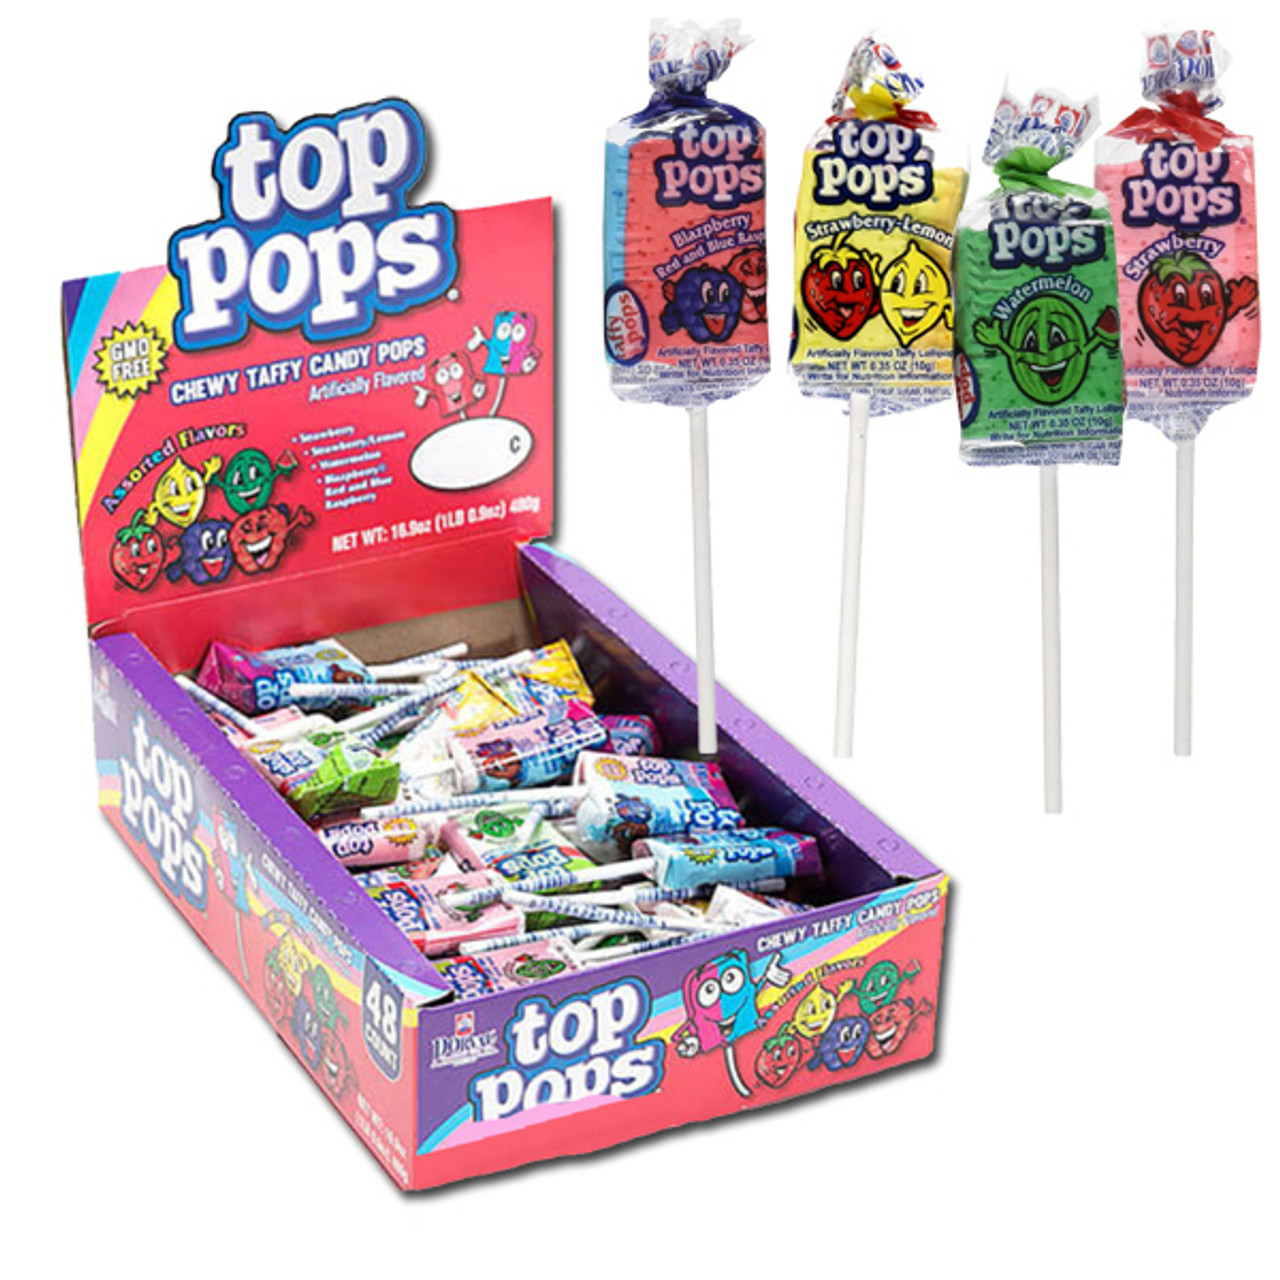 Charms Super Blow Pops Assorted 48 Count